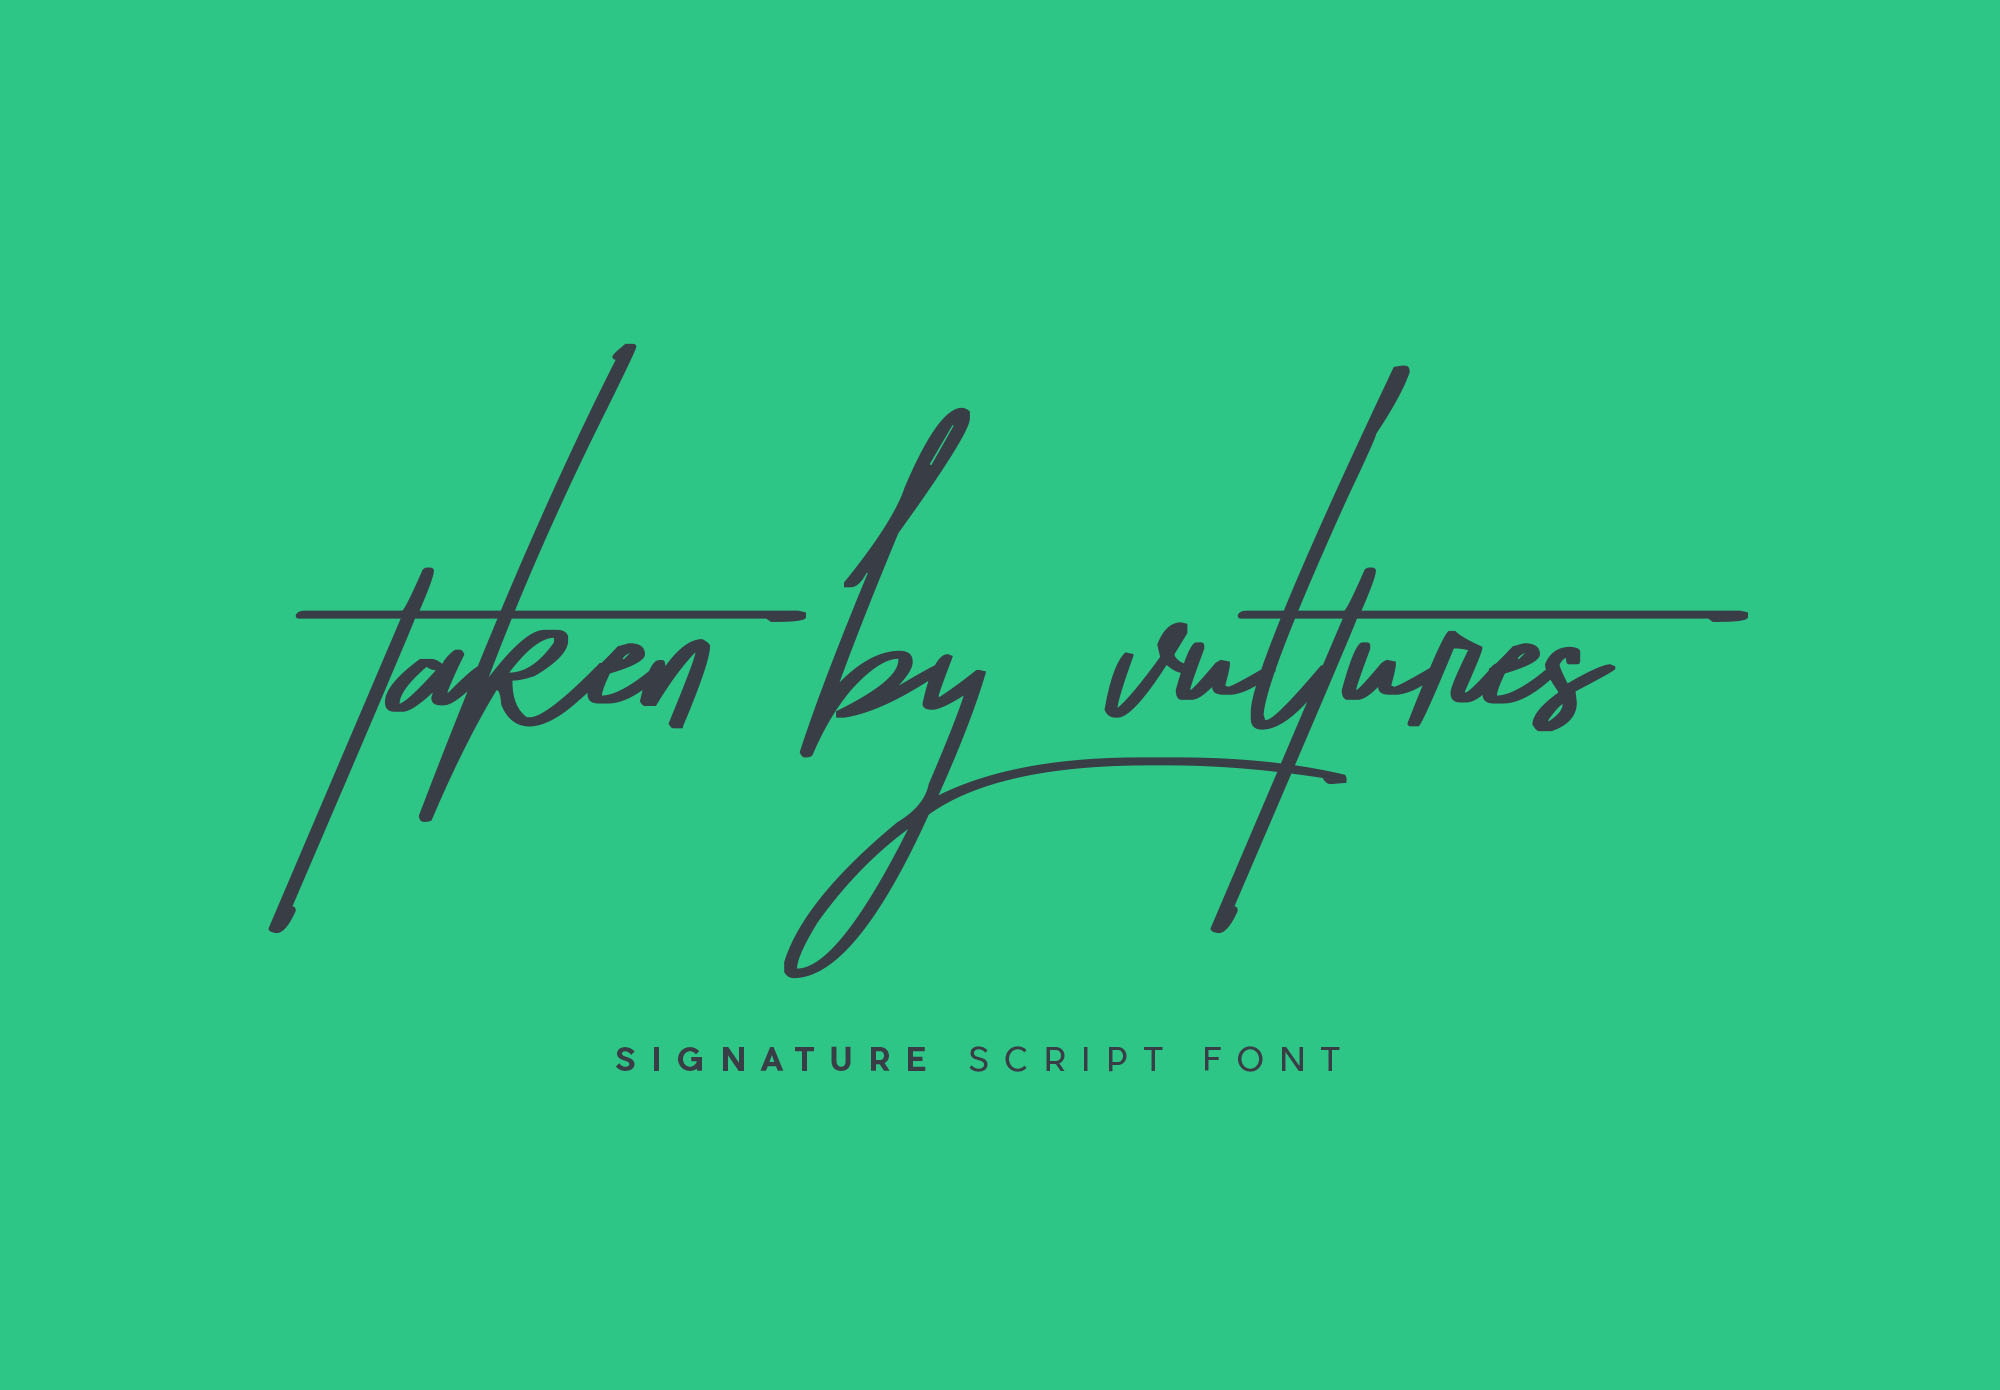 Taken by Vultures Signature Font